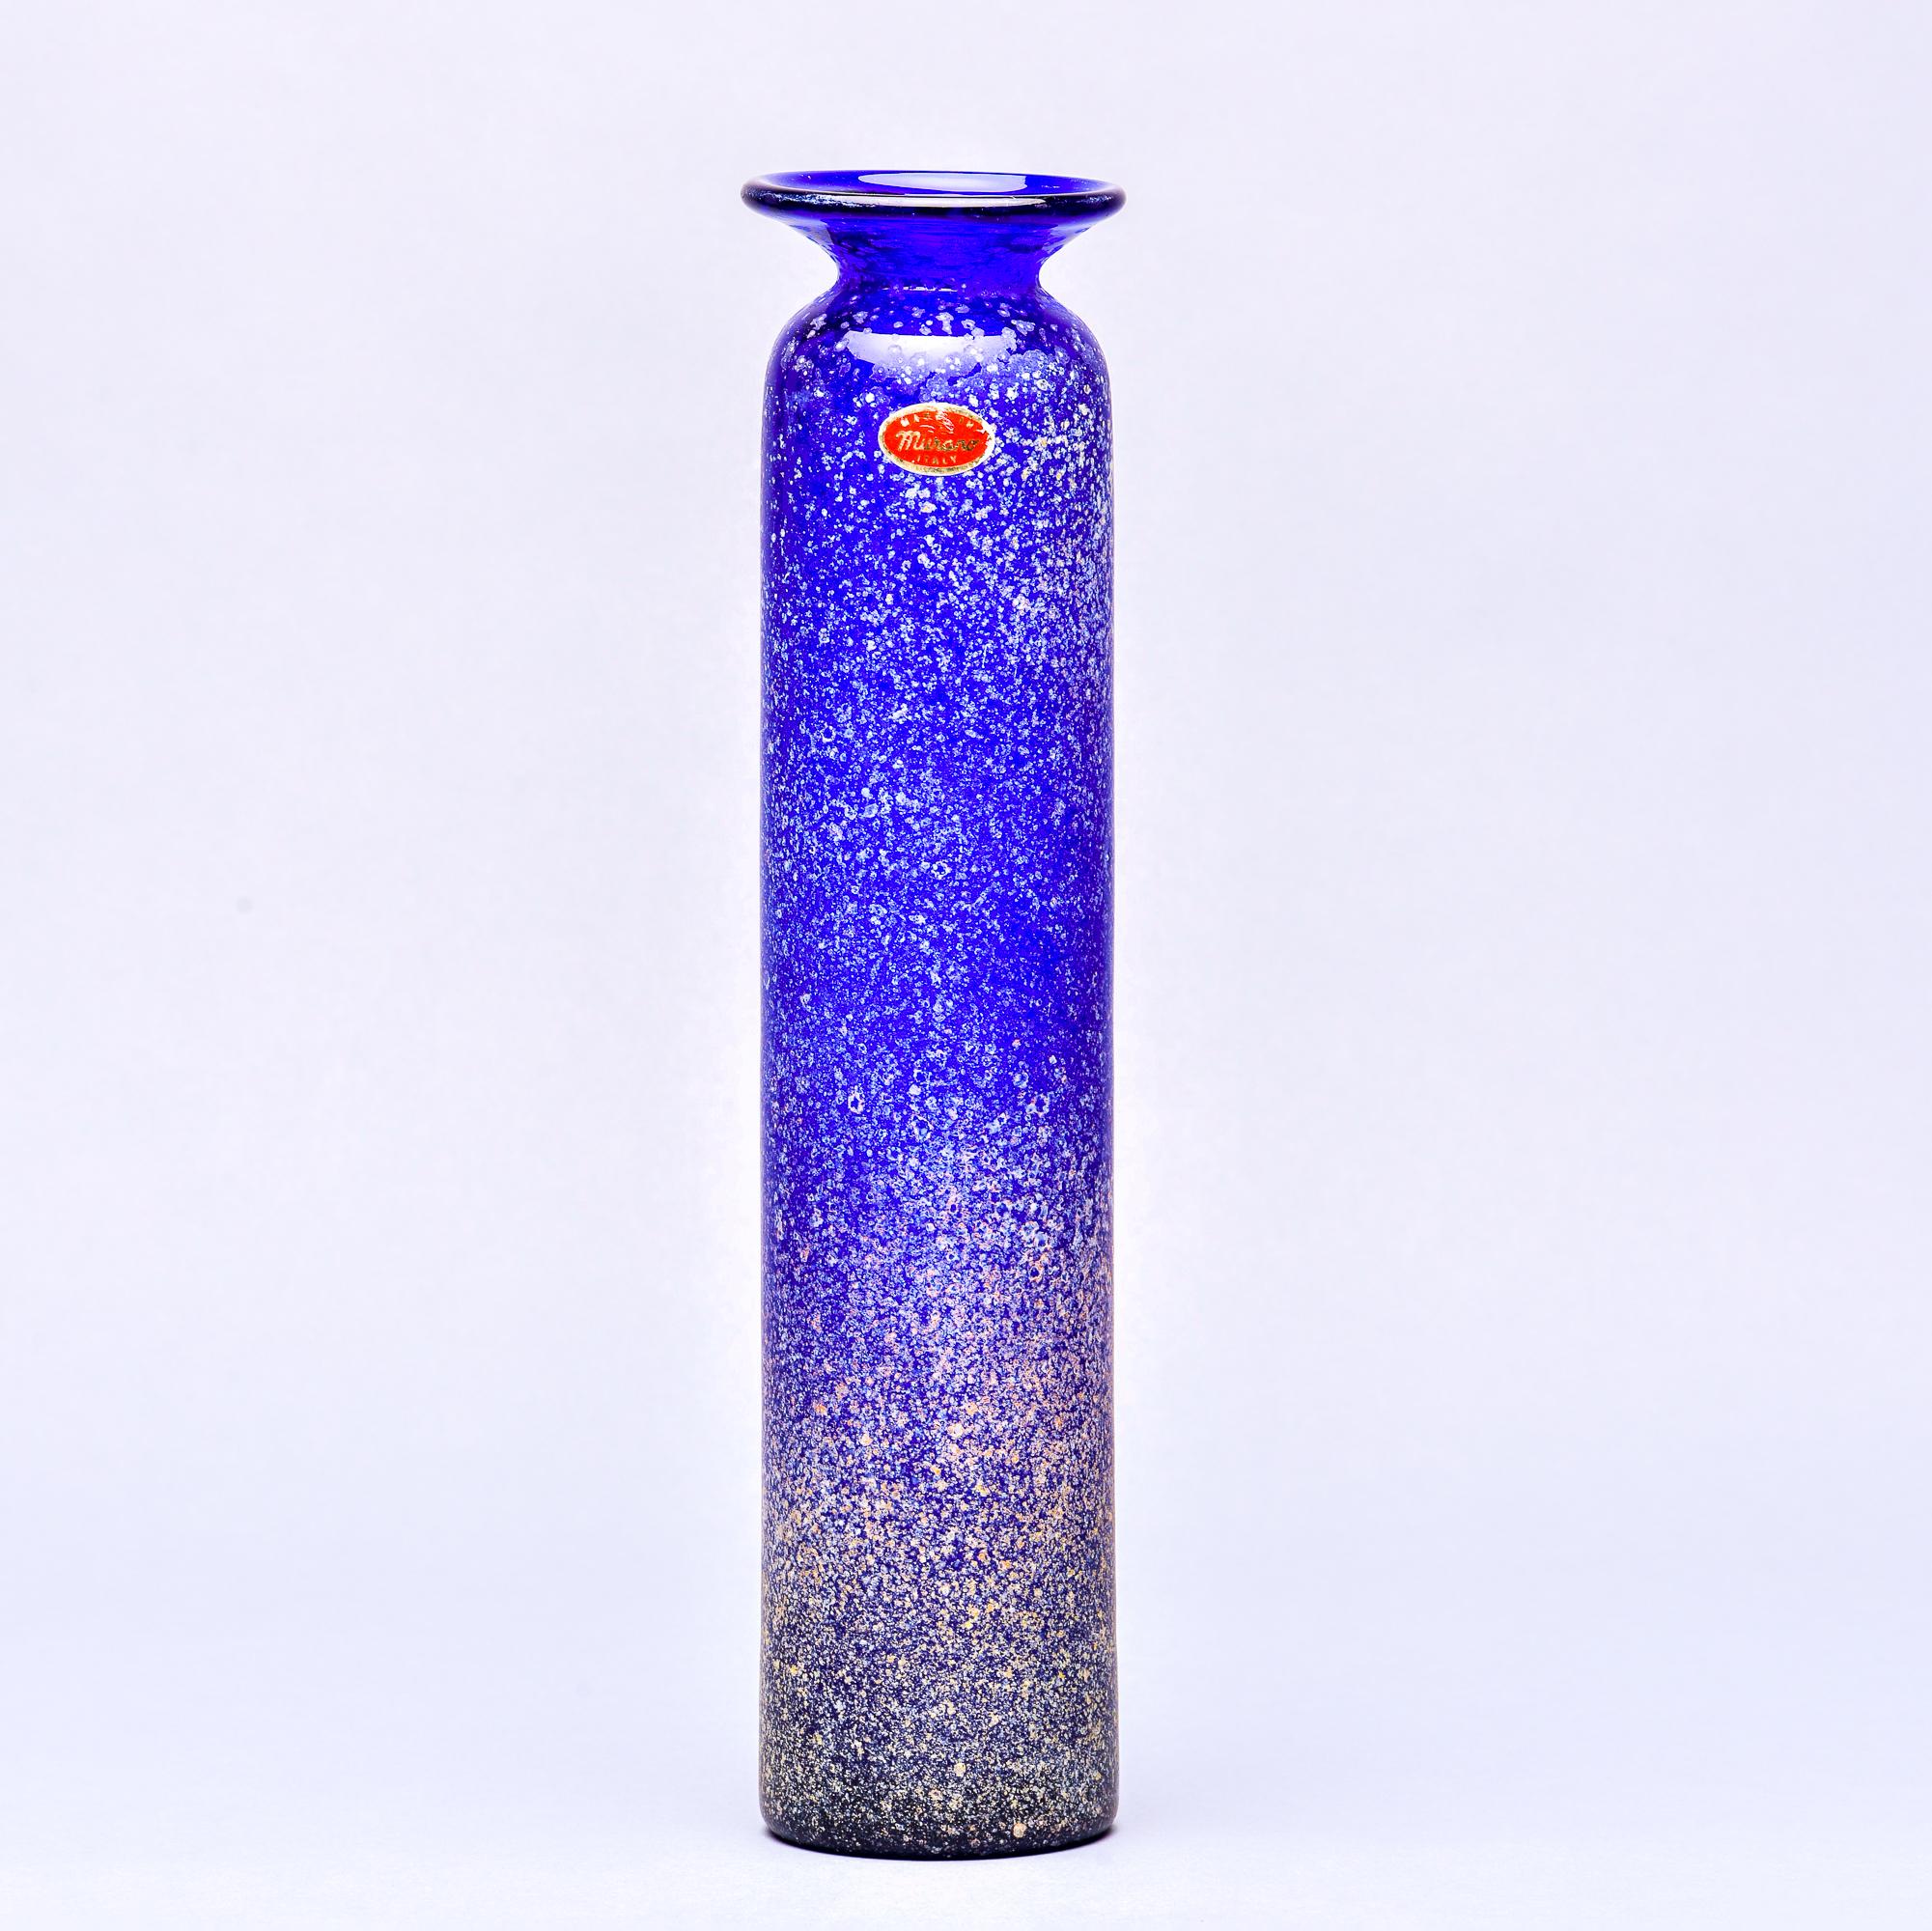 Found in Italy, this circa 1960s tall slender scavo style Murano glass vase in cobalt blue stands just under 15” tall. Original foil Murano label still affixed but vase is unsigned by maker. Very good vintage condition with no flaws found and only